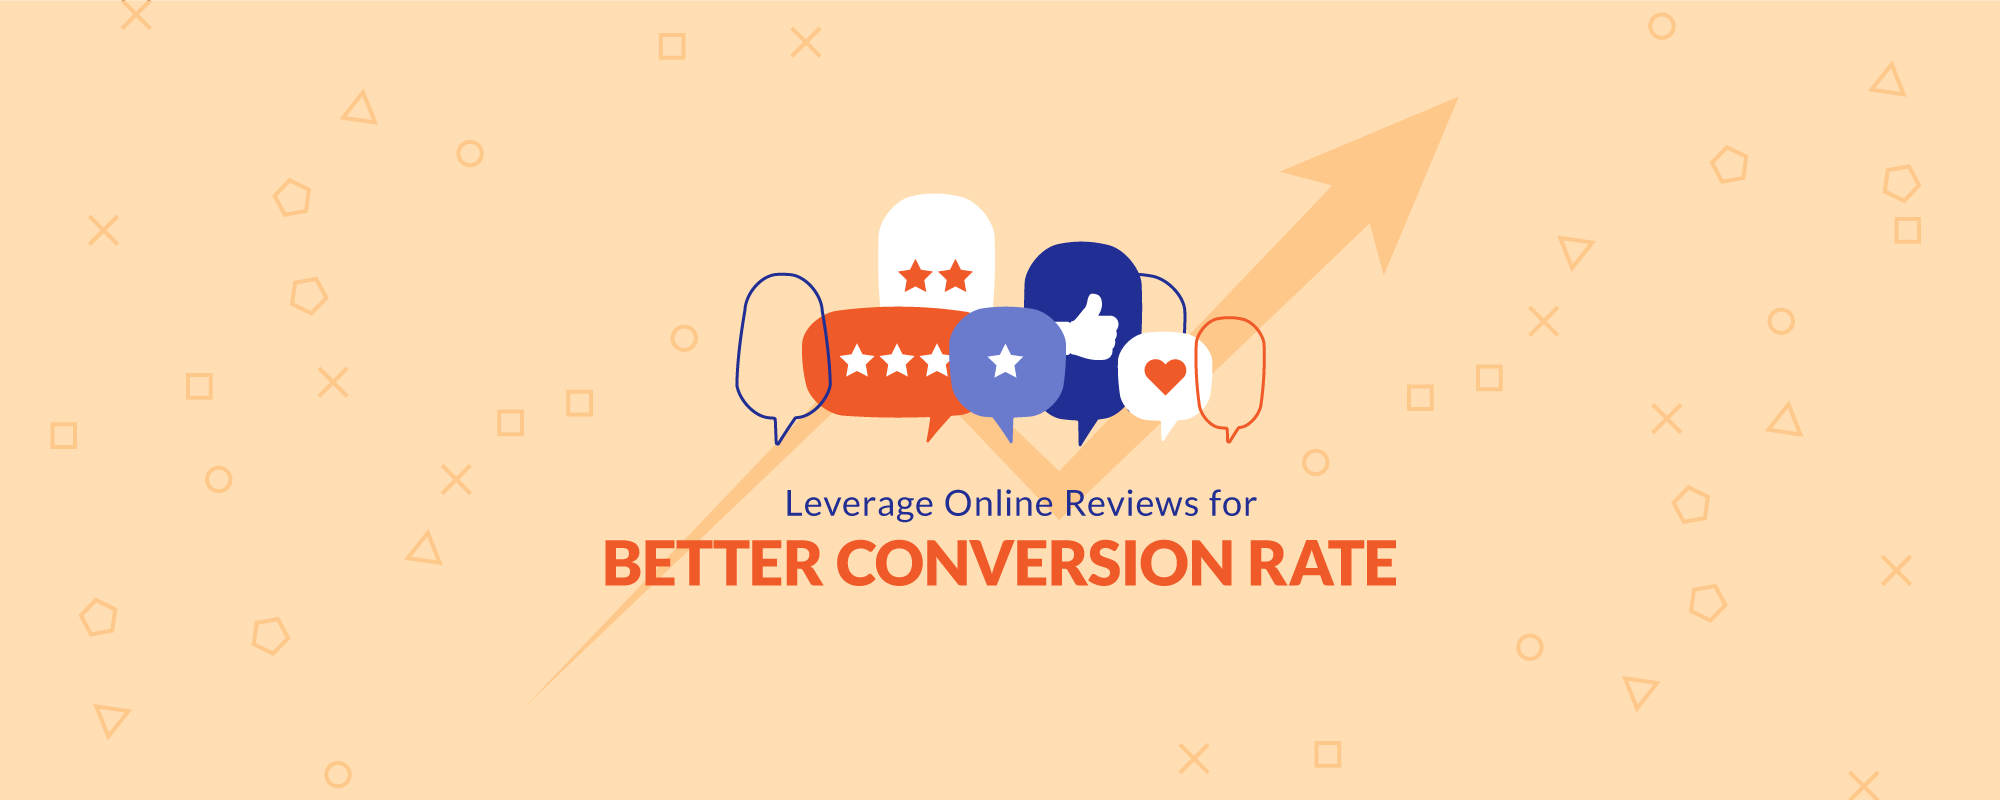 Online Reviews Can Impact The Conversion Rate Of Your Online Store & Website